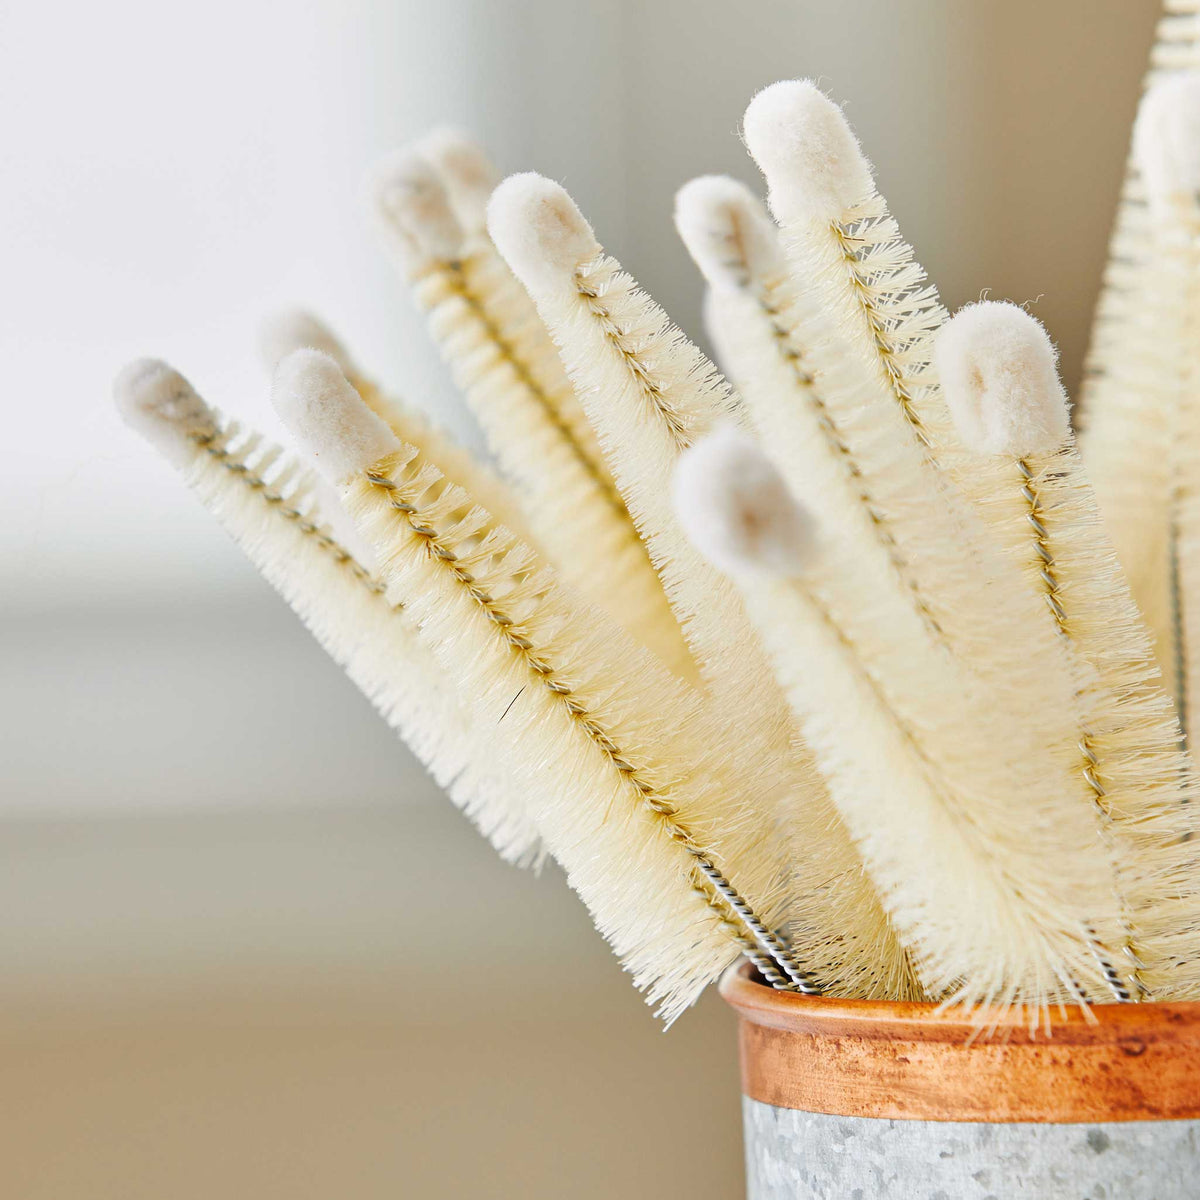 CONICAL CLEANING BRUSH